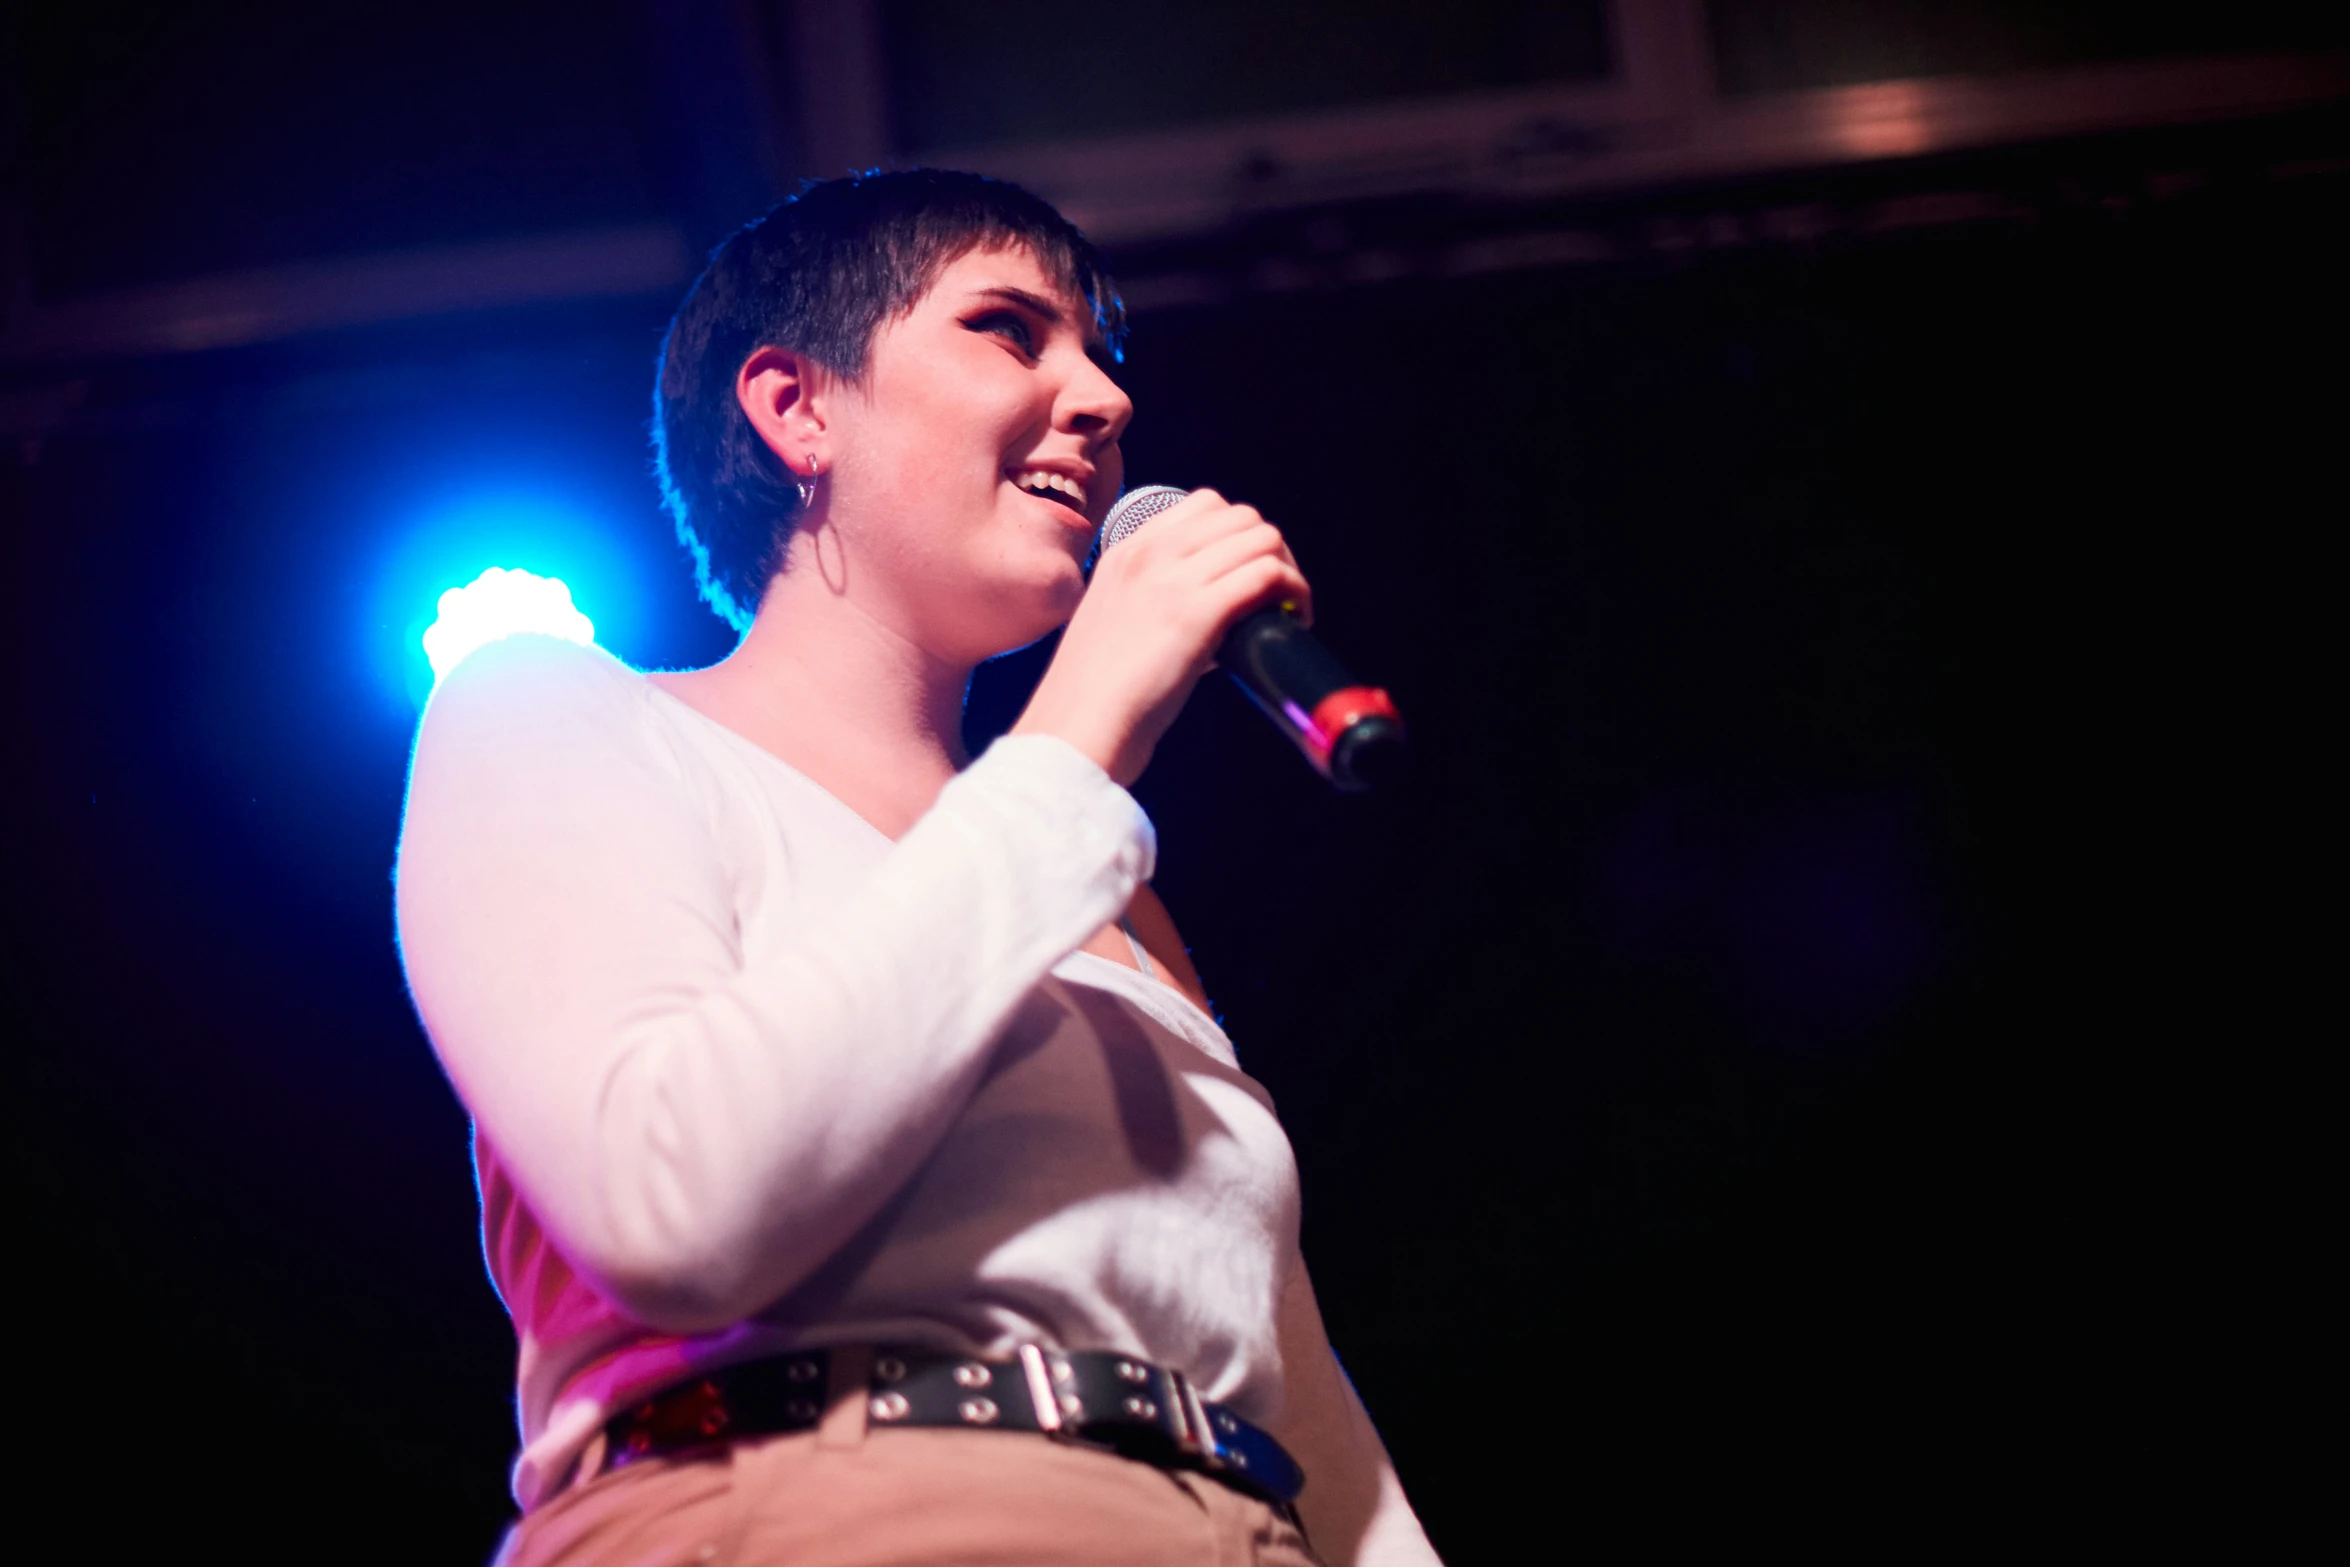 a woman with short hair and lights on her face sings